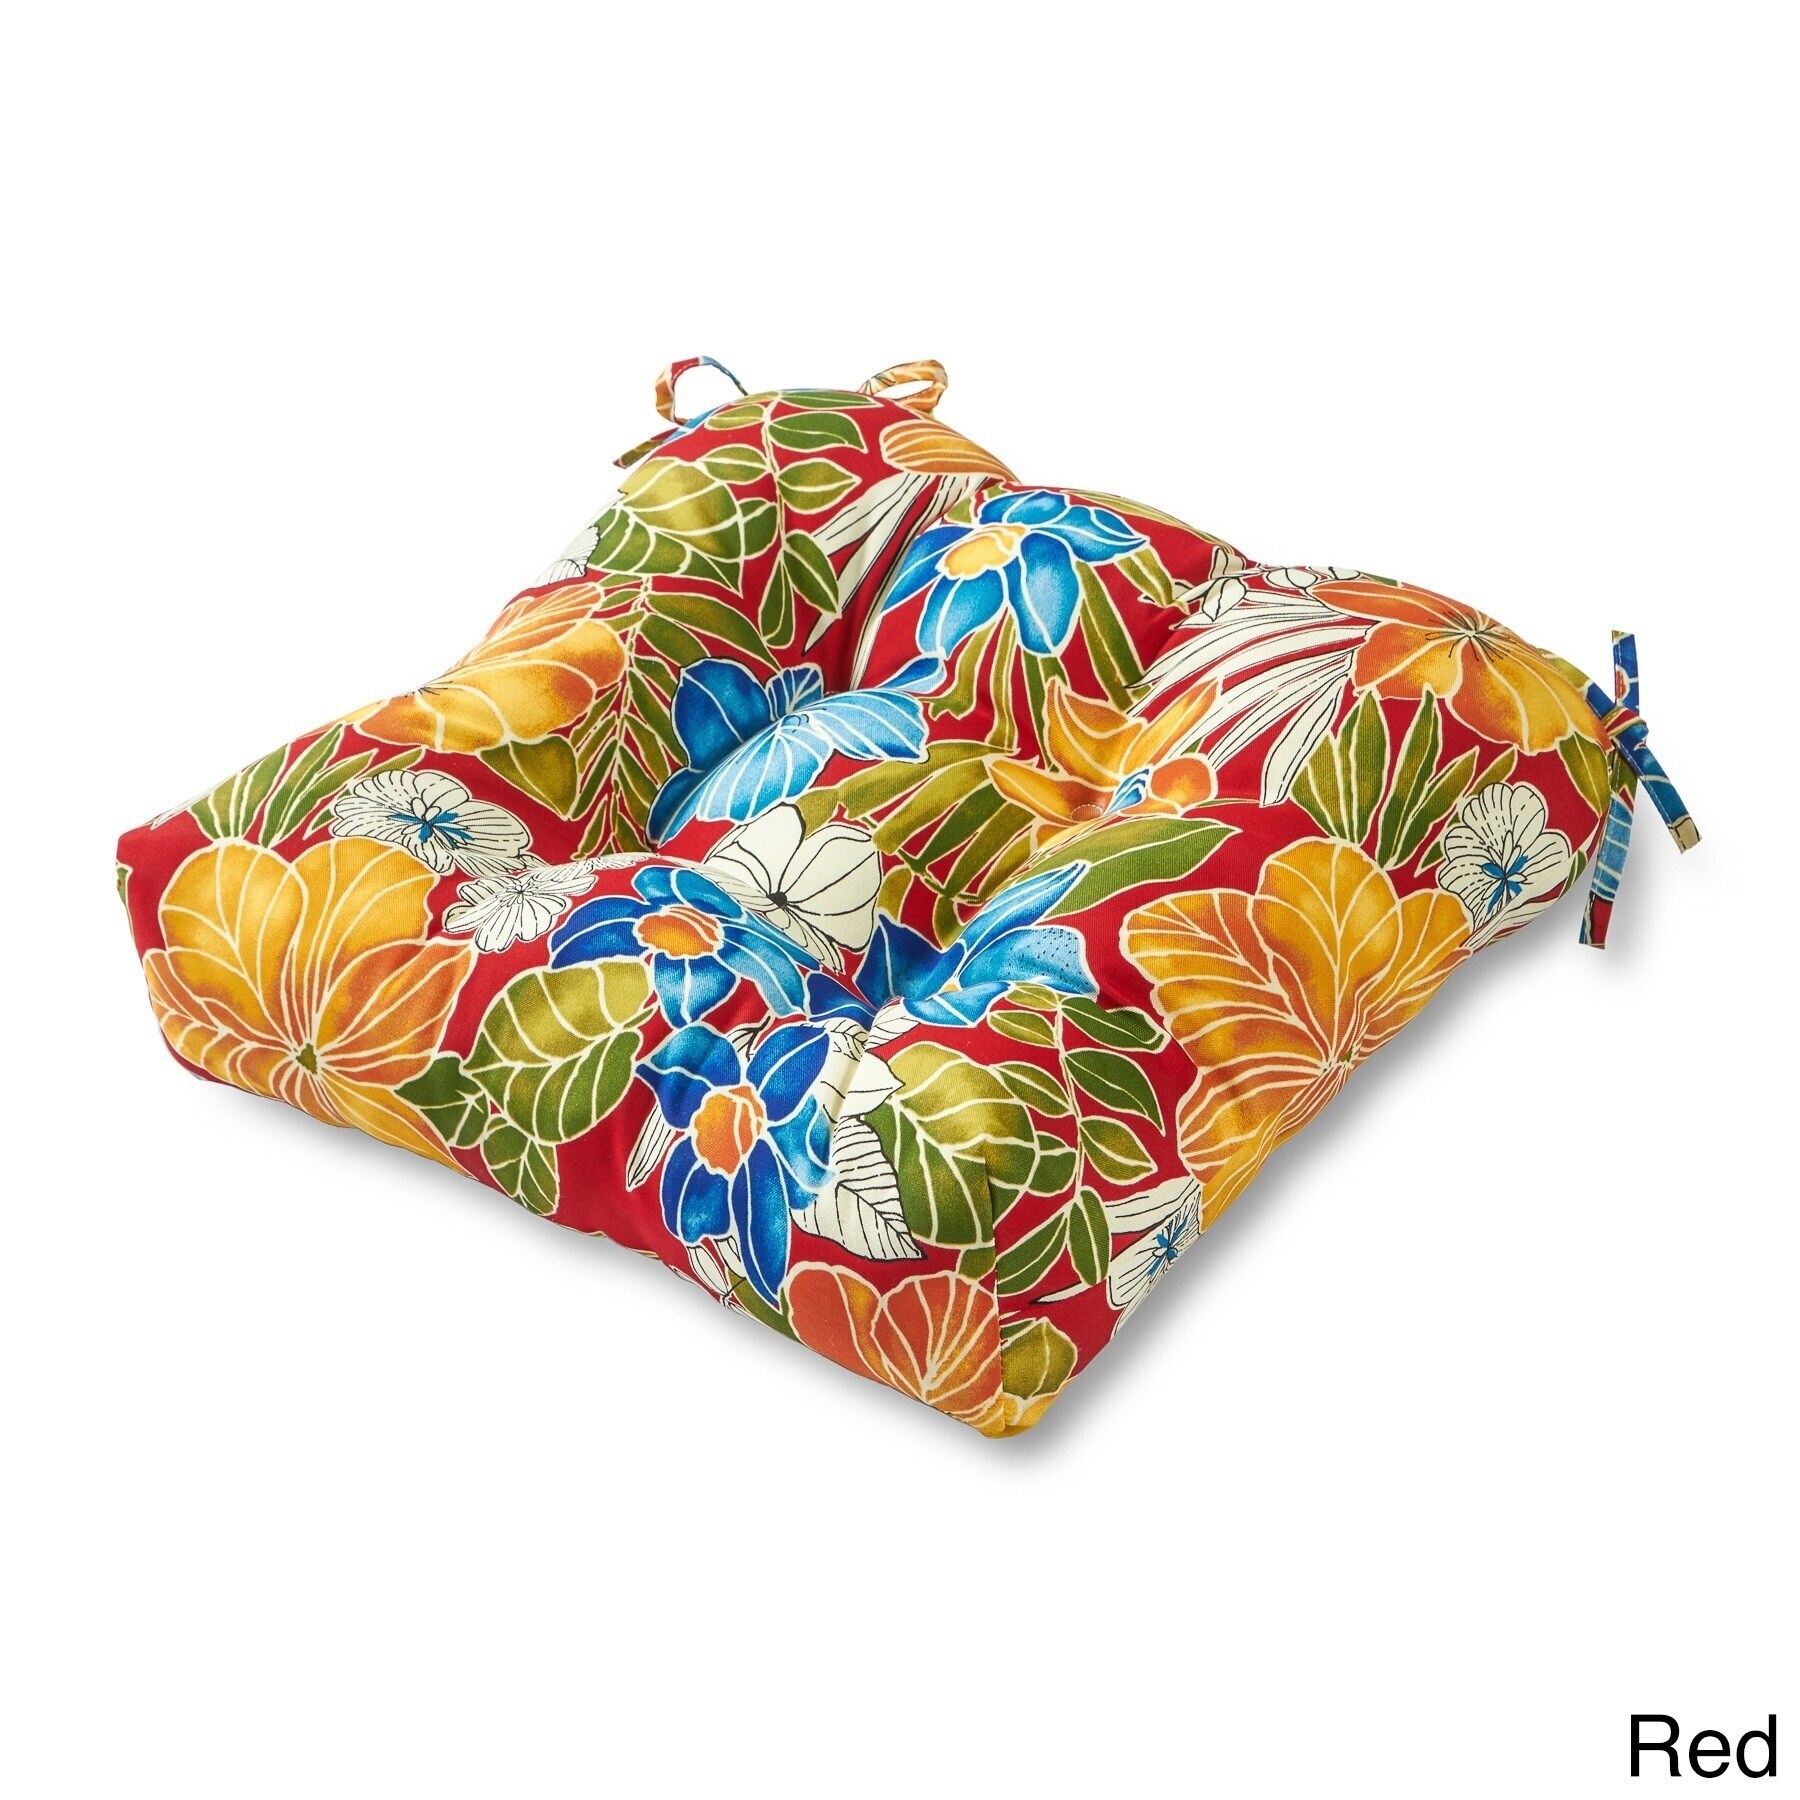 100-Percent Cotton 20-Inch by 20-Inch Yellow with Green Border Mahogany Floral Print Cushion